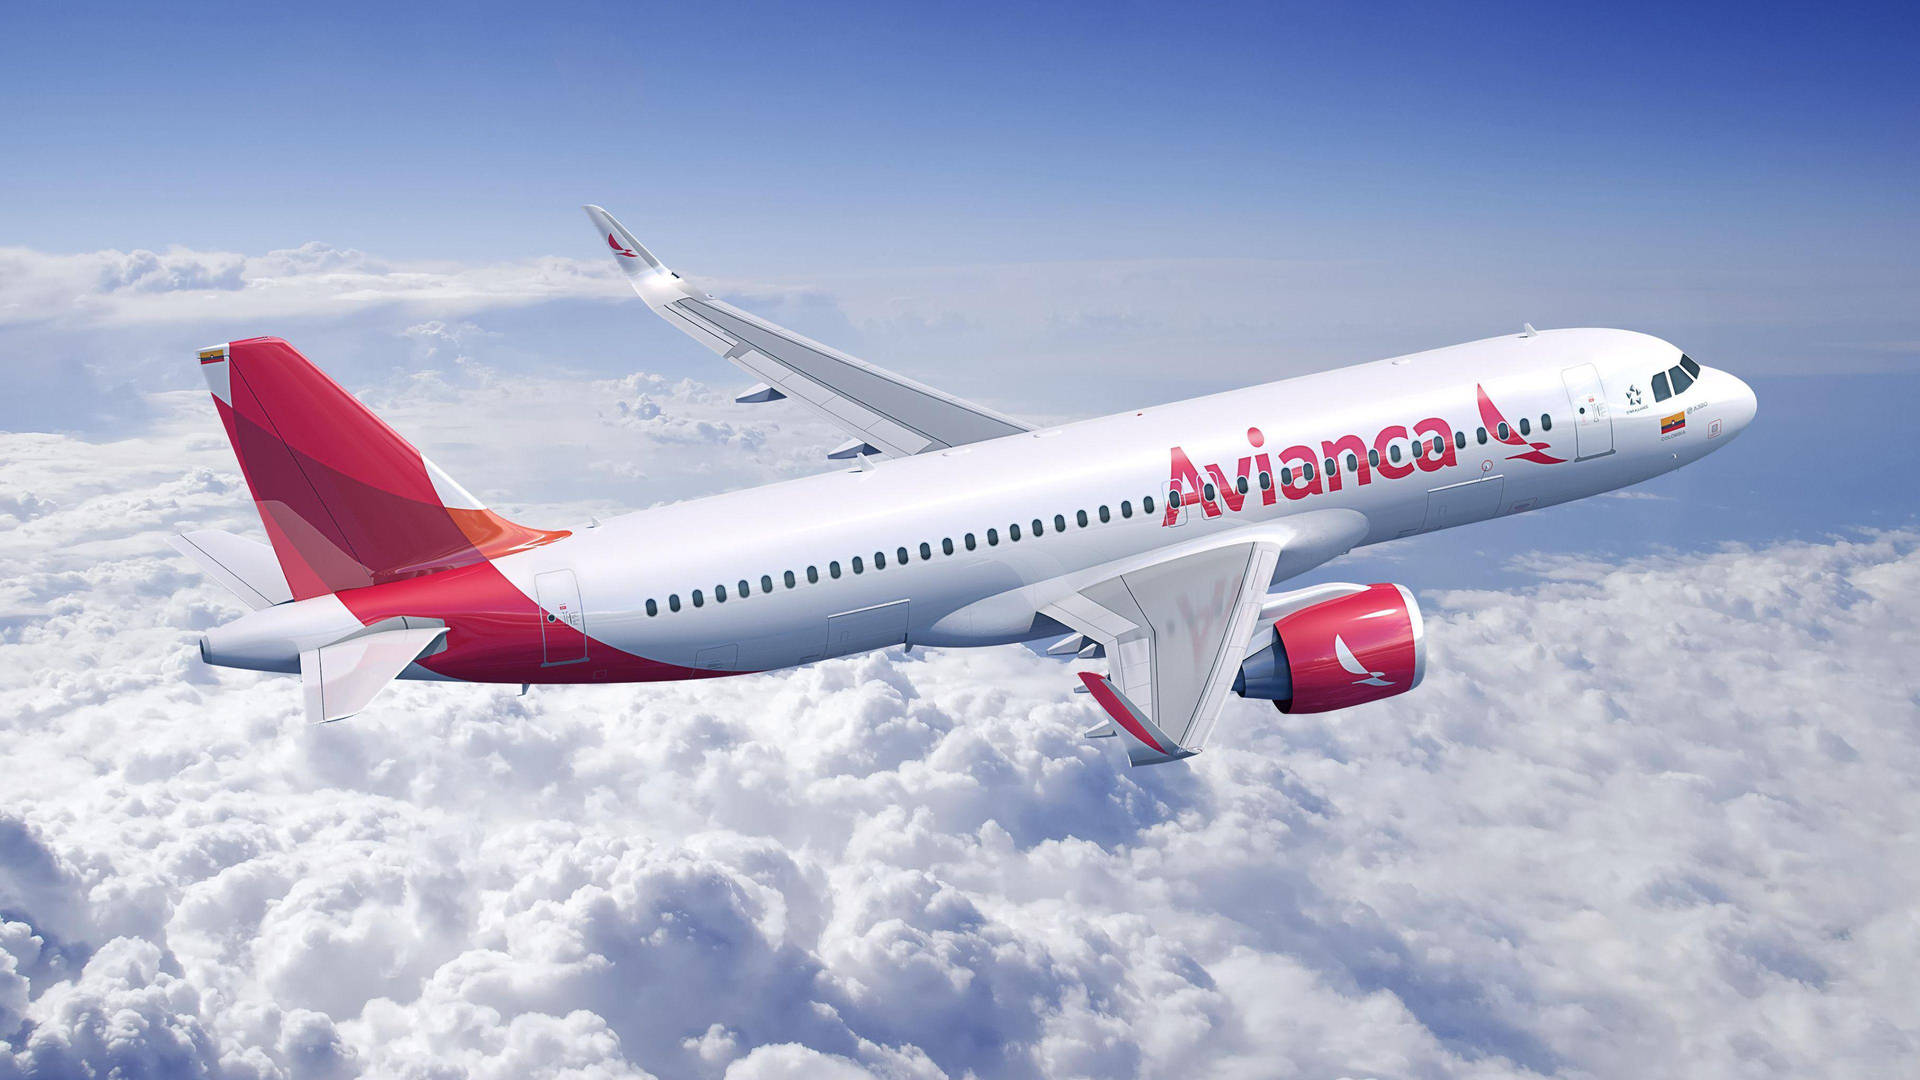 Avianca Airline Airbus A320 Above Clouds Wallpaper